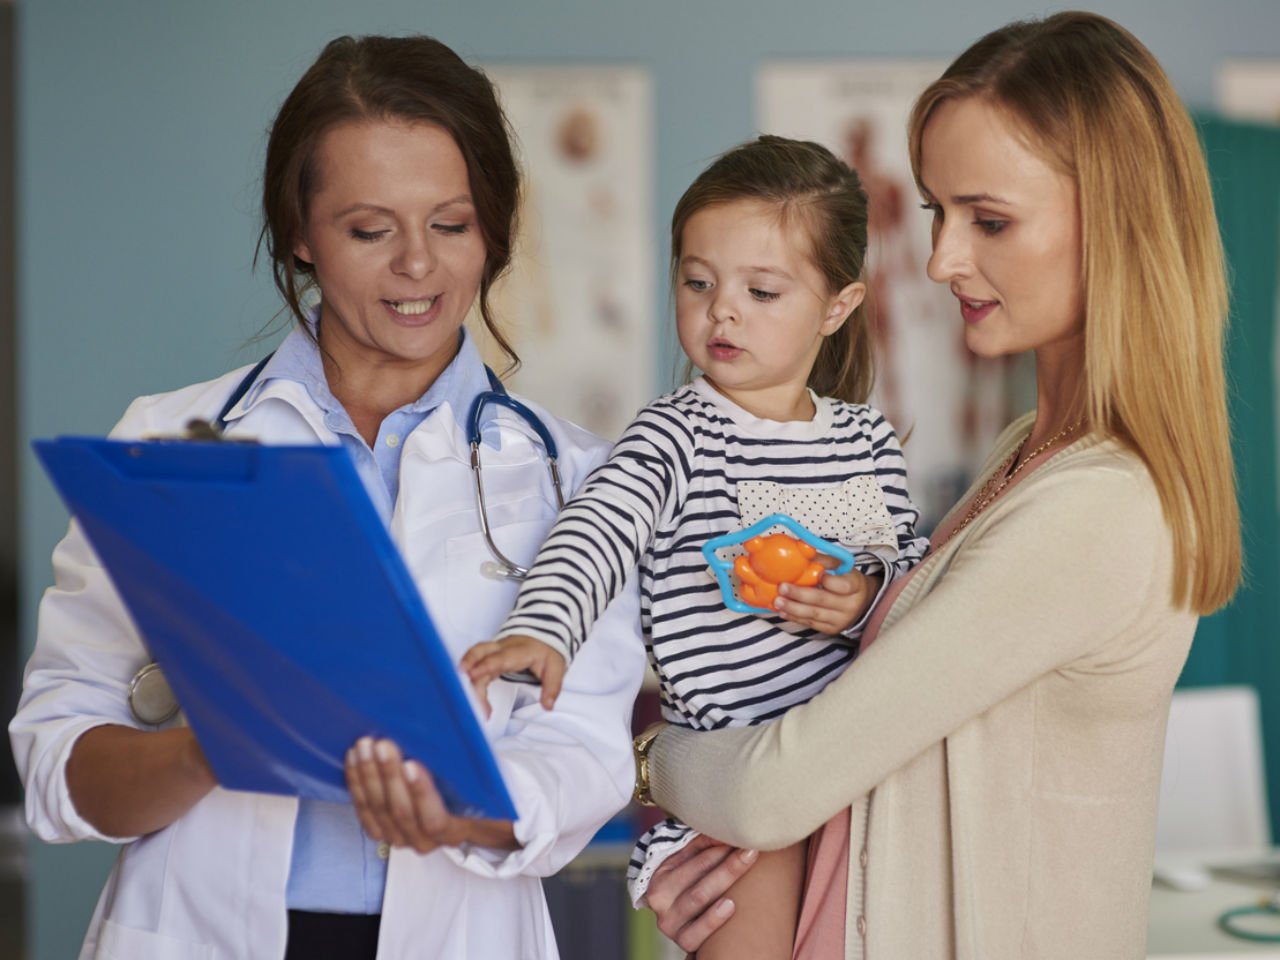 Doctor, mom and young child look onto the doctors notes in the ER